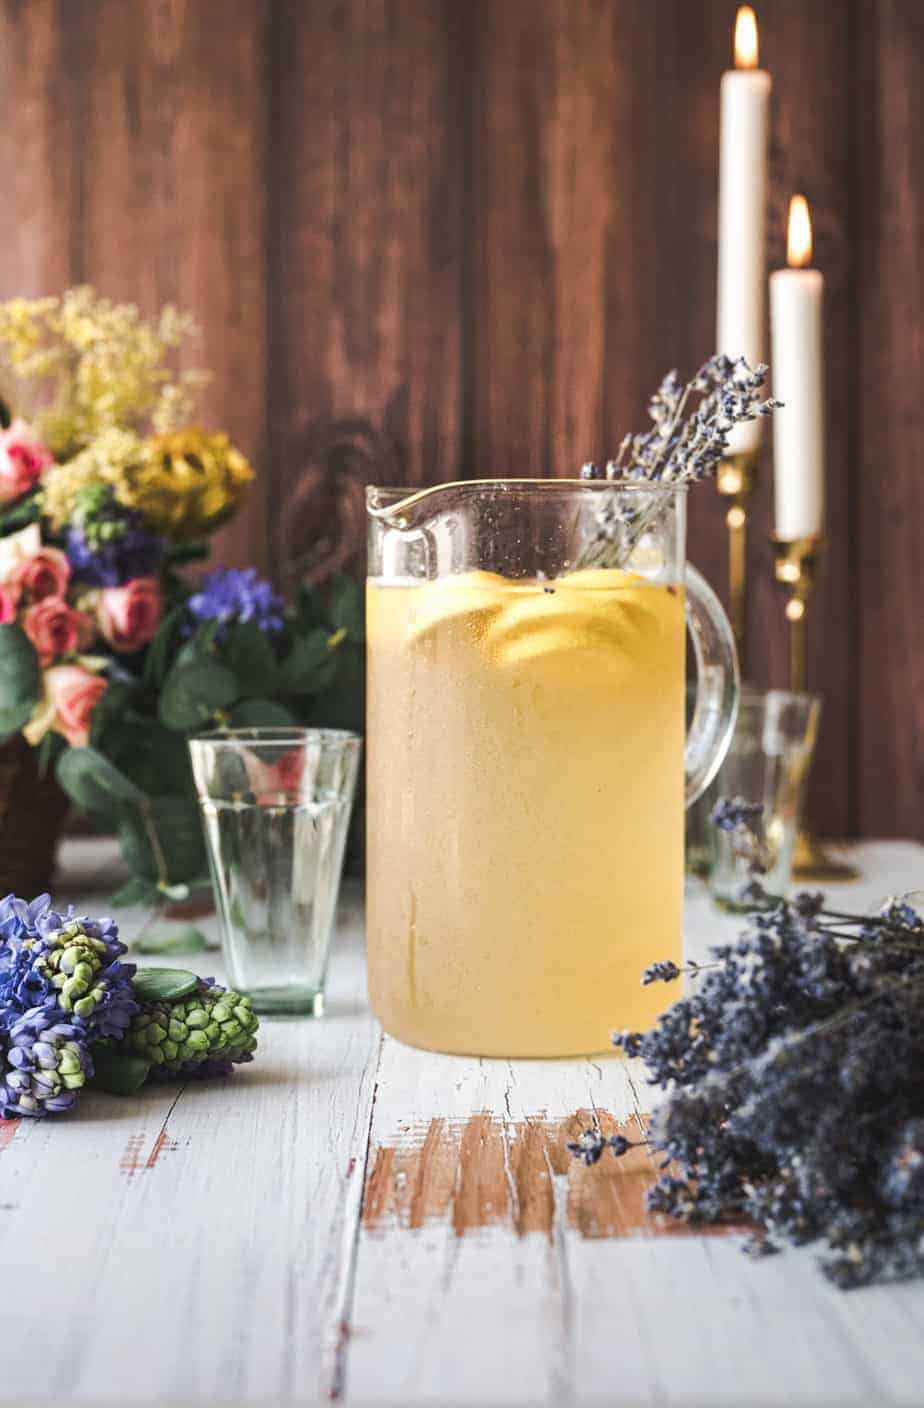 a pitcher filled with lavender lemonade, on a white rustic wooden table top, with a brown wooden panels in the background, with candles lit and a basket of fresh market flowers off to the side